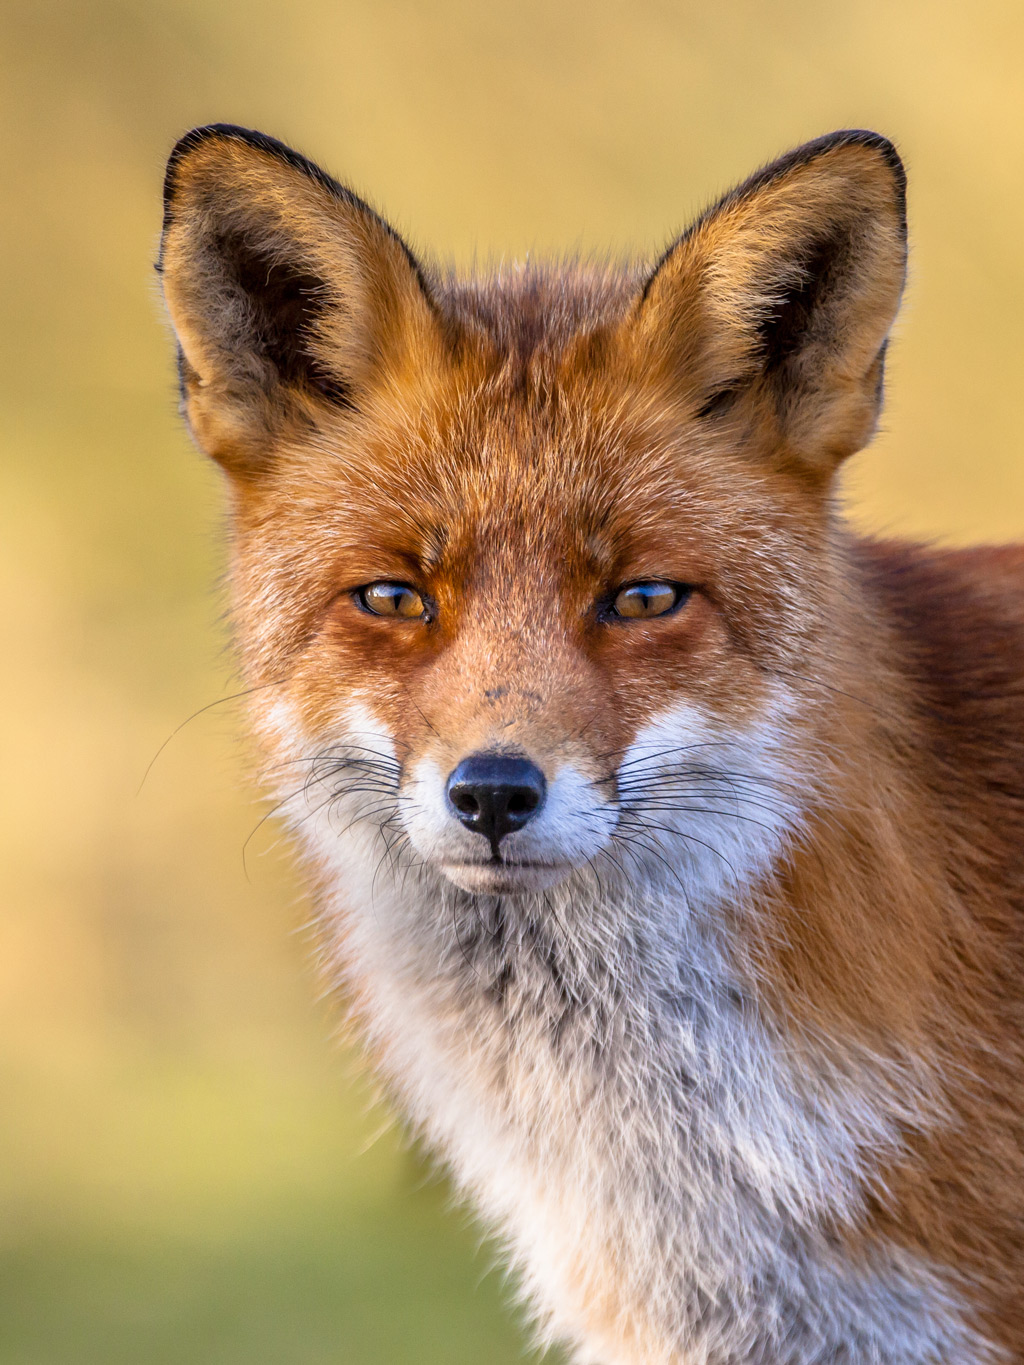 Sad face of a Red fox